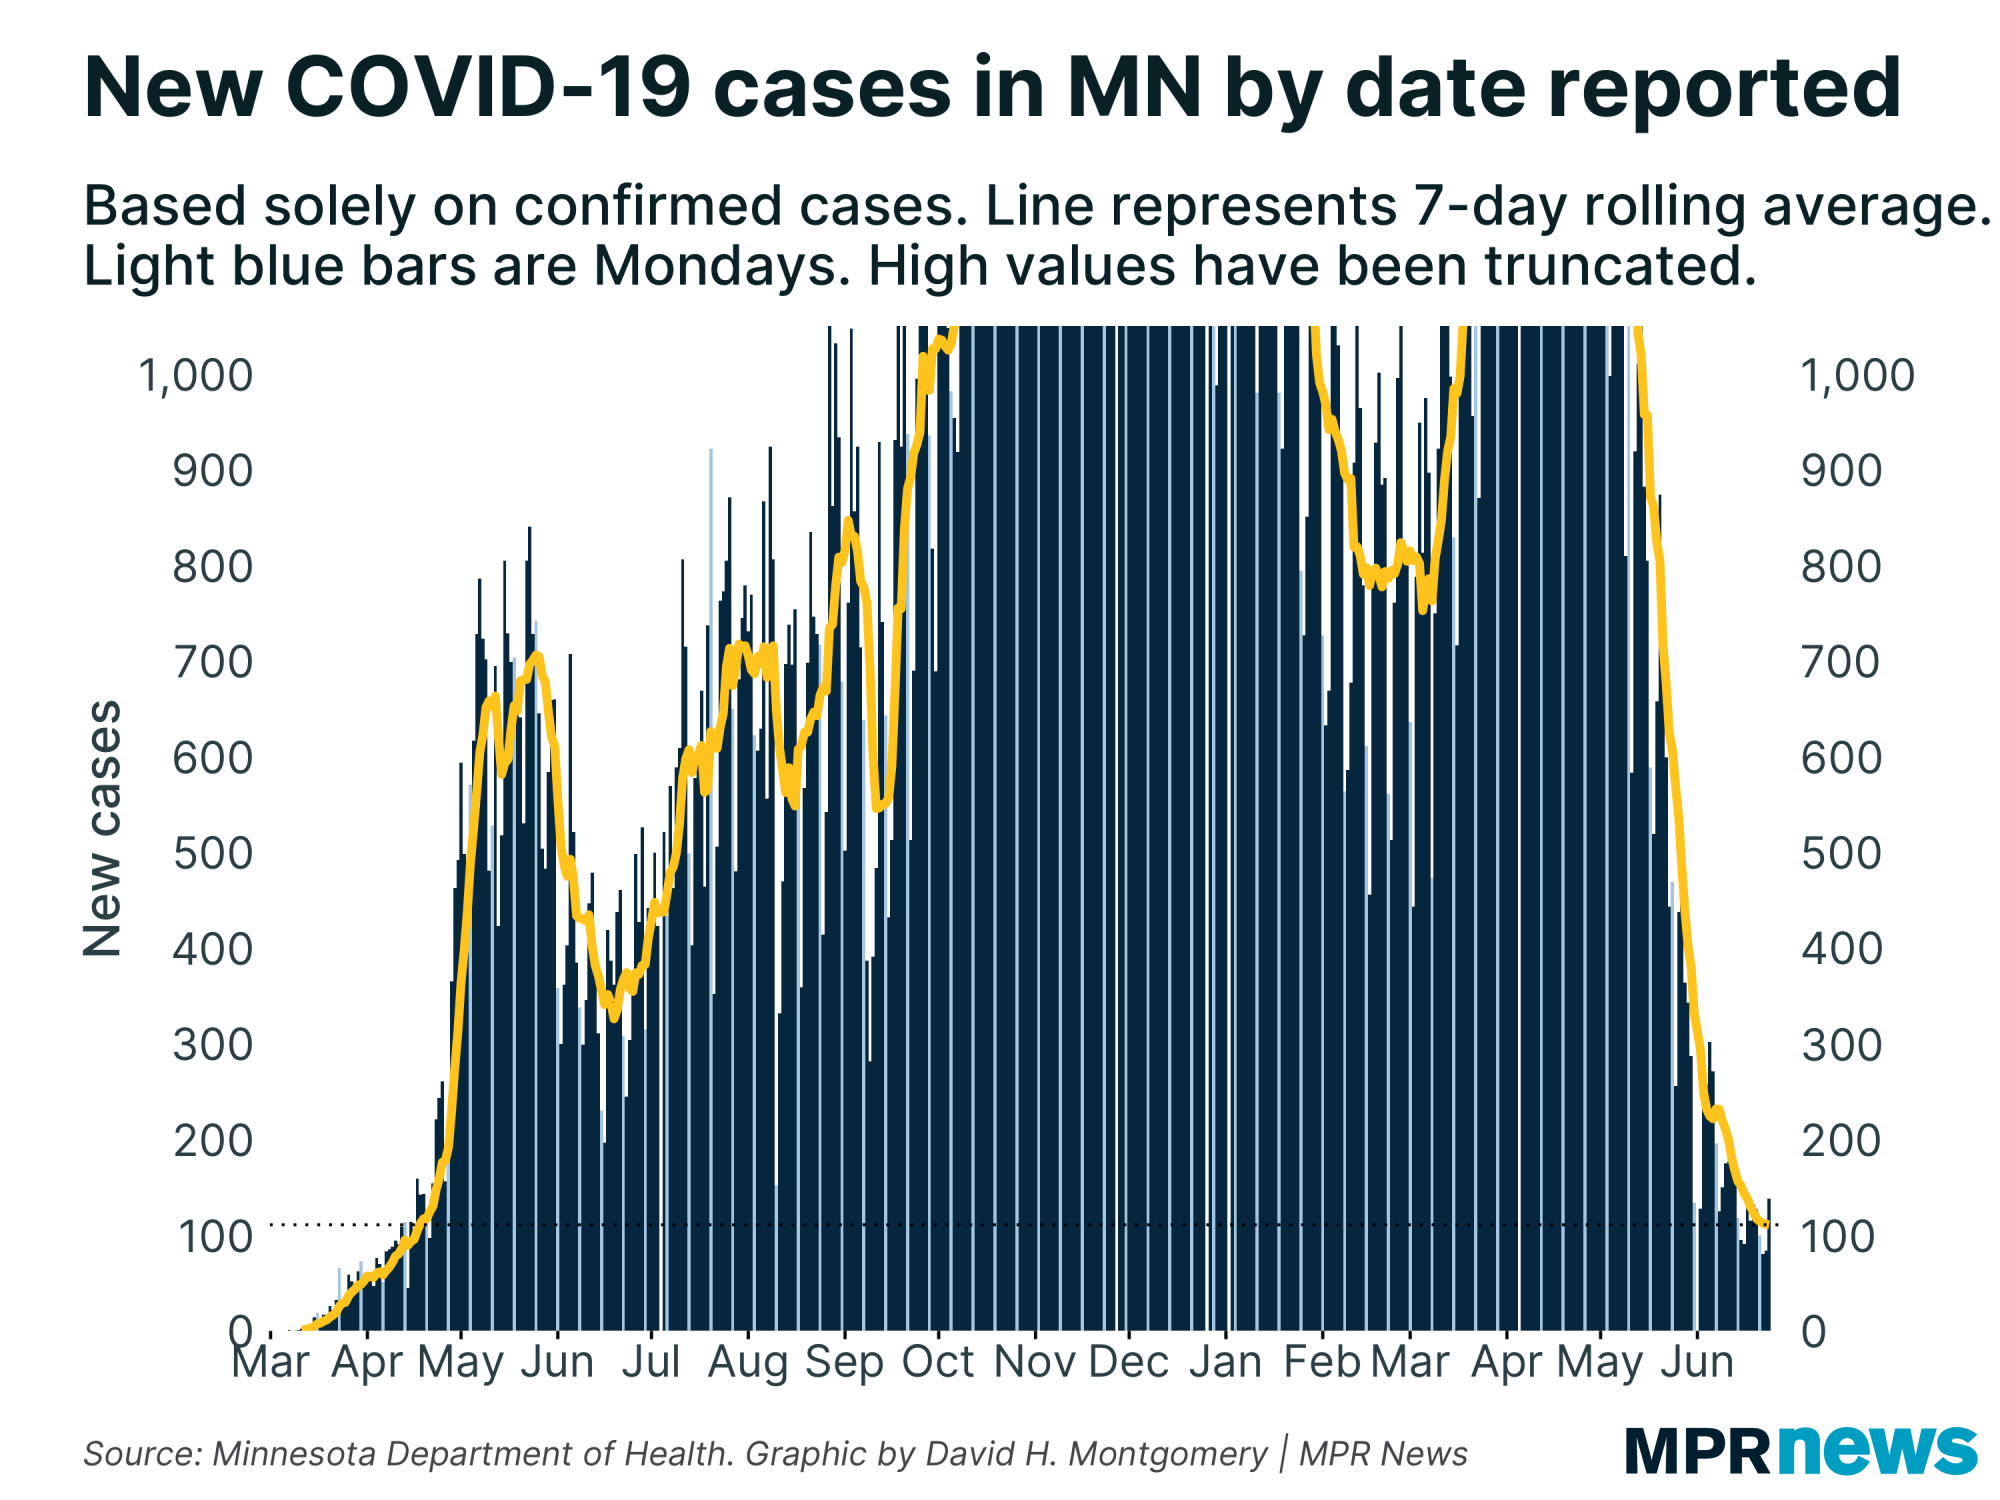 New COVID-19 cases in Minnesota by date reported